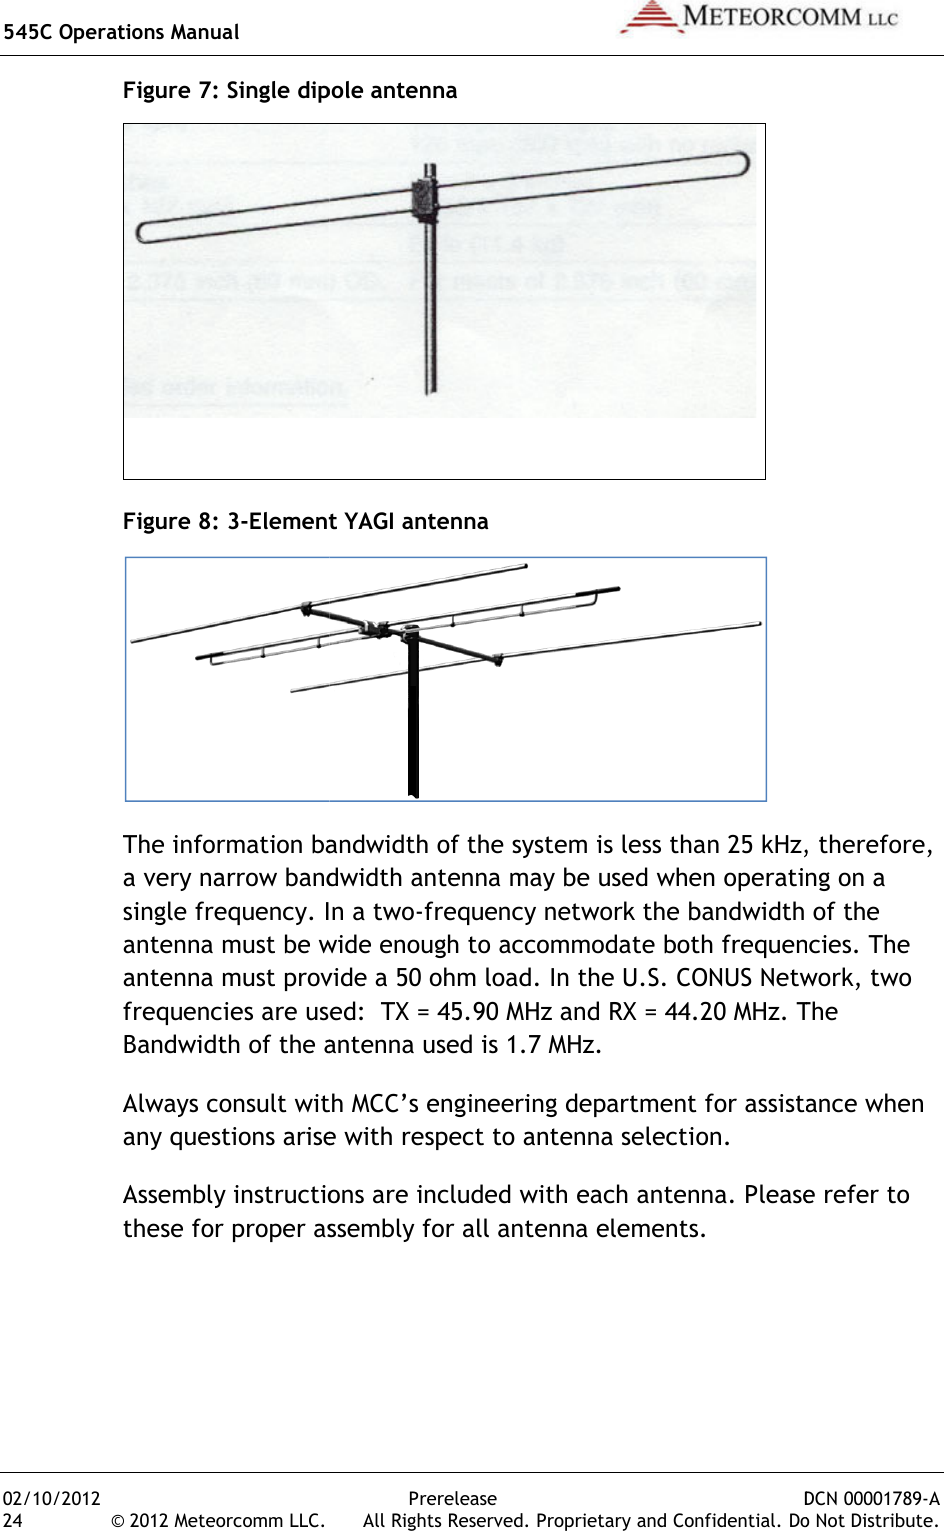 545C Operations Manual 02/10/2012 24 © 2012 Meteorcomm LLC. Figure 7: Single dipole antennaFigure 8: 3-Element YAGI antennaThe information bandwidth of the system is less than 25 kHz, therefore, a very narrow bandwidth antenna may be used when operating on a single frequency. In a twoantenna must be wide enough to accommodate both frequenciesantenna must provide a 50 ohm loadfrequencies are used:  TX = 45.90 MHz and RX = 44.20 MHzBandwidth of the antenna used is 1.7 MHz.Always consult with MCC’s enany questions arise with respect to antenna selection.Assembly instructions are included with each antennathese for proper assembly for all antenna elements.Prerelease DCN .  All Rights Reserved. Proprietary and Confidential. Do: Single dipole antenna  Element YAGI antenna  The information bandwidth of the system is less than 25 kHz, therefore, a very narrow bandwidth antenna may be used when operating on a In a two-frequency network the bandwidth of the must be wide enough to accommodate both frequenciesantenna must provide a 50 ohm load. In the U.S. CONUS Network, two frequencies are used:  TX = 45.90 MHz and RX = 44.20 MHz. The Bandwidth of the antenna used is 1.7 MHz. Always consult with MCC’s engineering department for assistance when any questions arise with respect to antenna selection. Assembly instructions are included with each antenna. Please refer to these for proper assembly for all antenna elements.  DCN 00001789-A Do Not Distribute. The information bandwidth of the system is less than 25 kHz, therefore, a very narrow bandwidth antenna may be used when operating on a frequency network the bandwidth of the must be wide enough to accommodate both frequencies. The In the U.S. CONUS Network, two The gineering department for assistance when Please refer to 